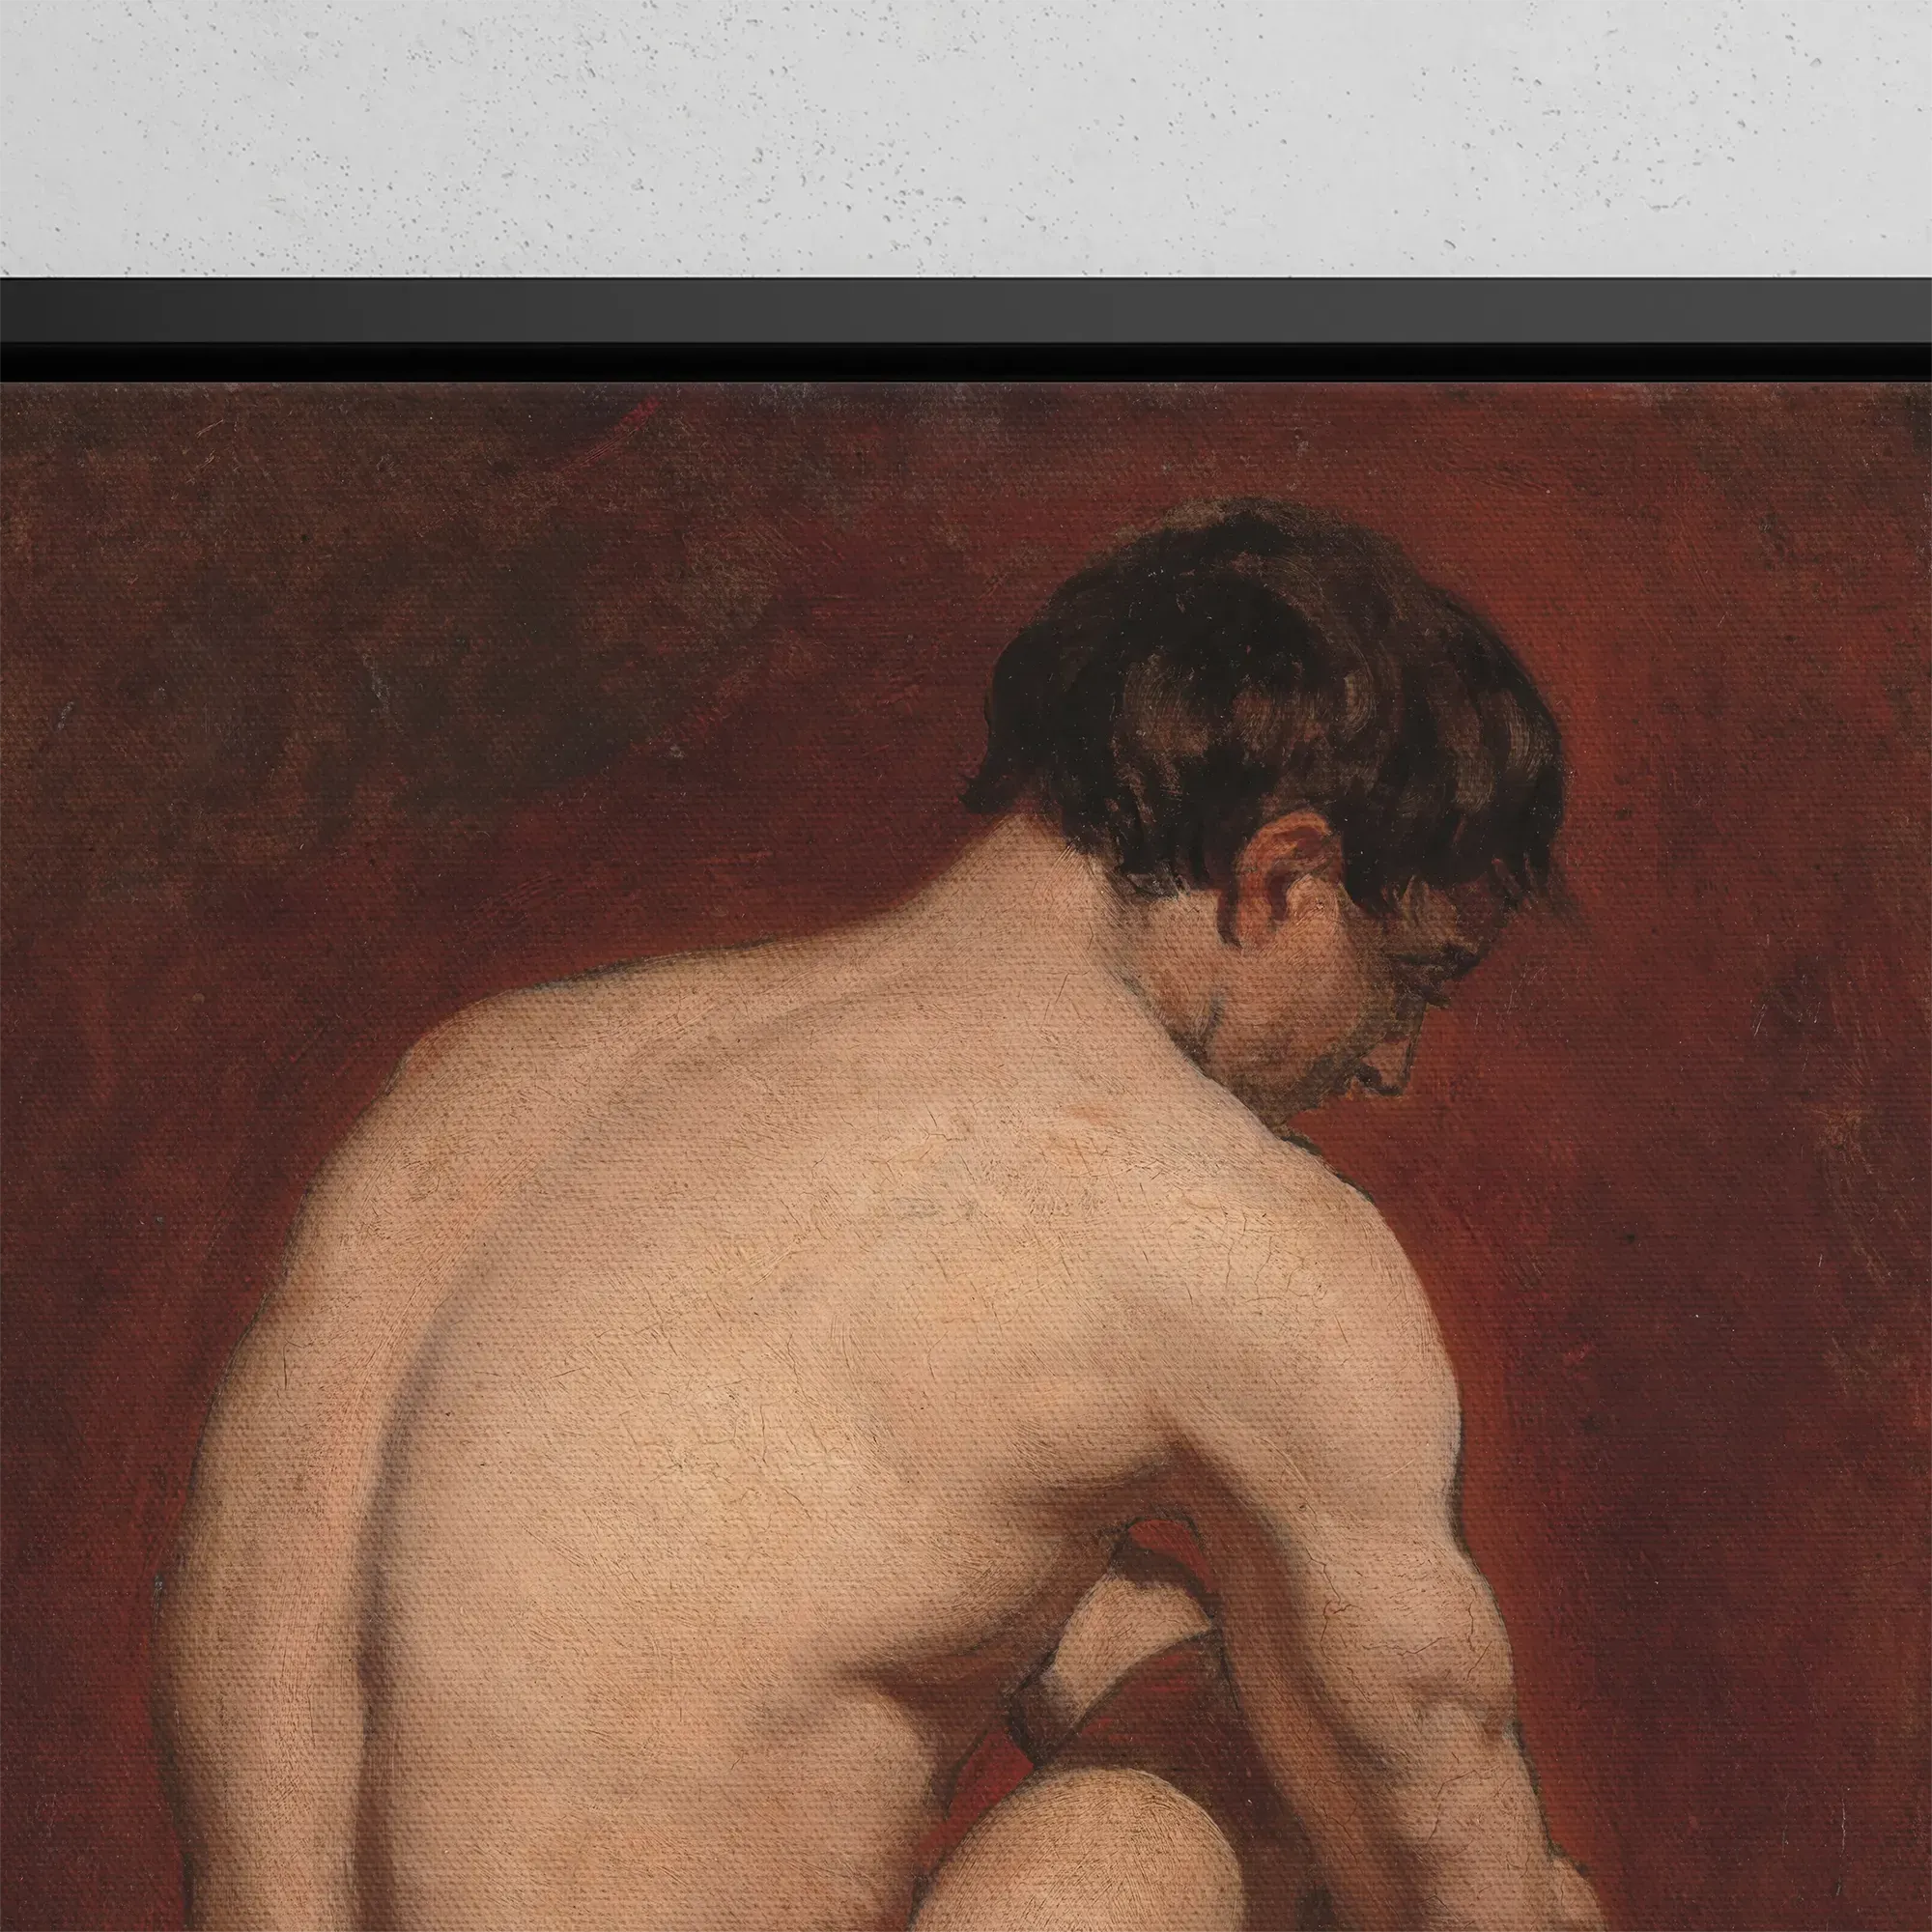 Male Nude From The Back - William Etty Gay Art Framed Canvas - Posters Prints & Visual Artwork - Aesthetic Art